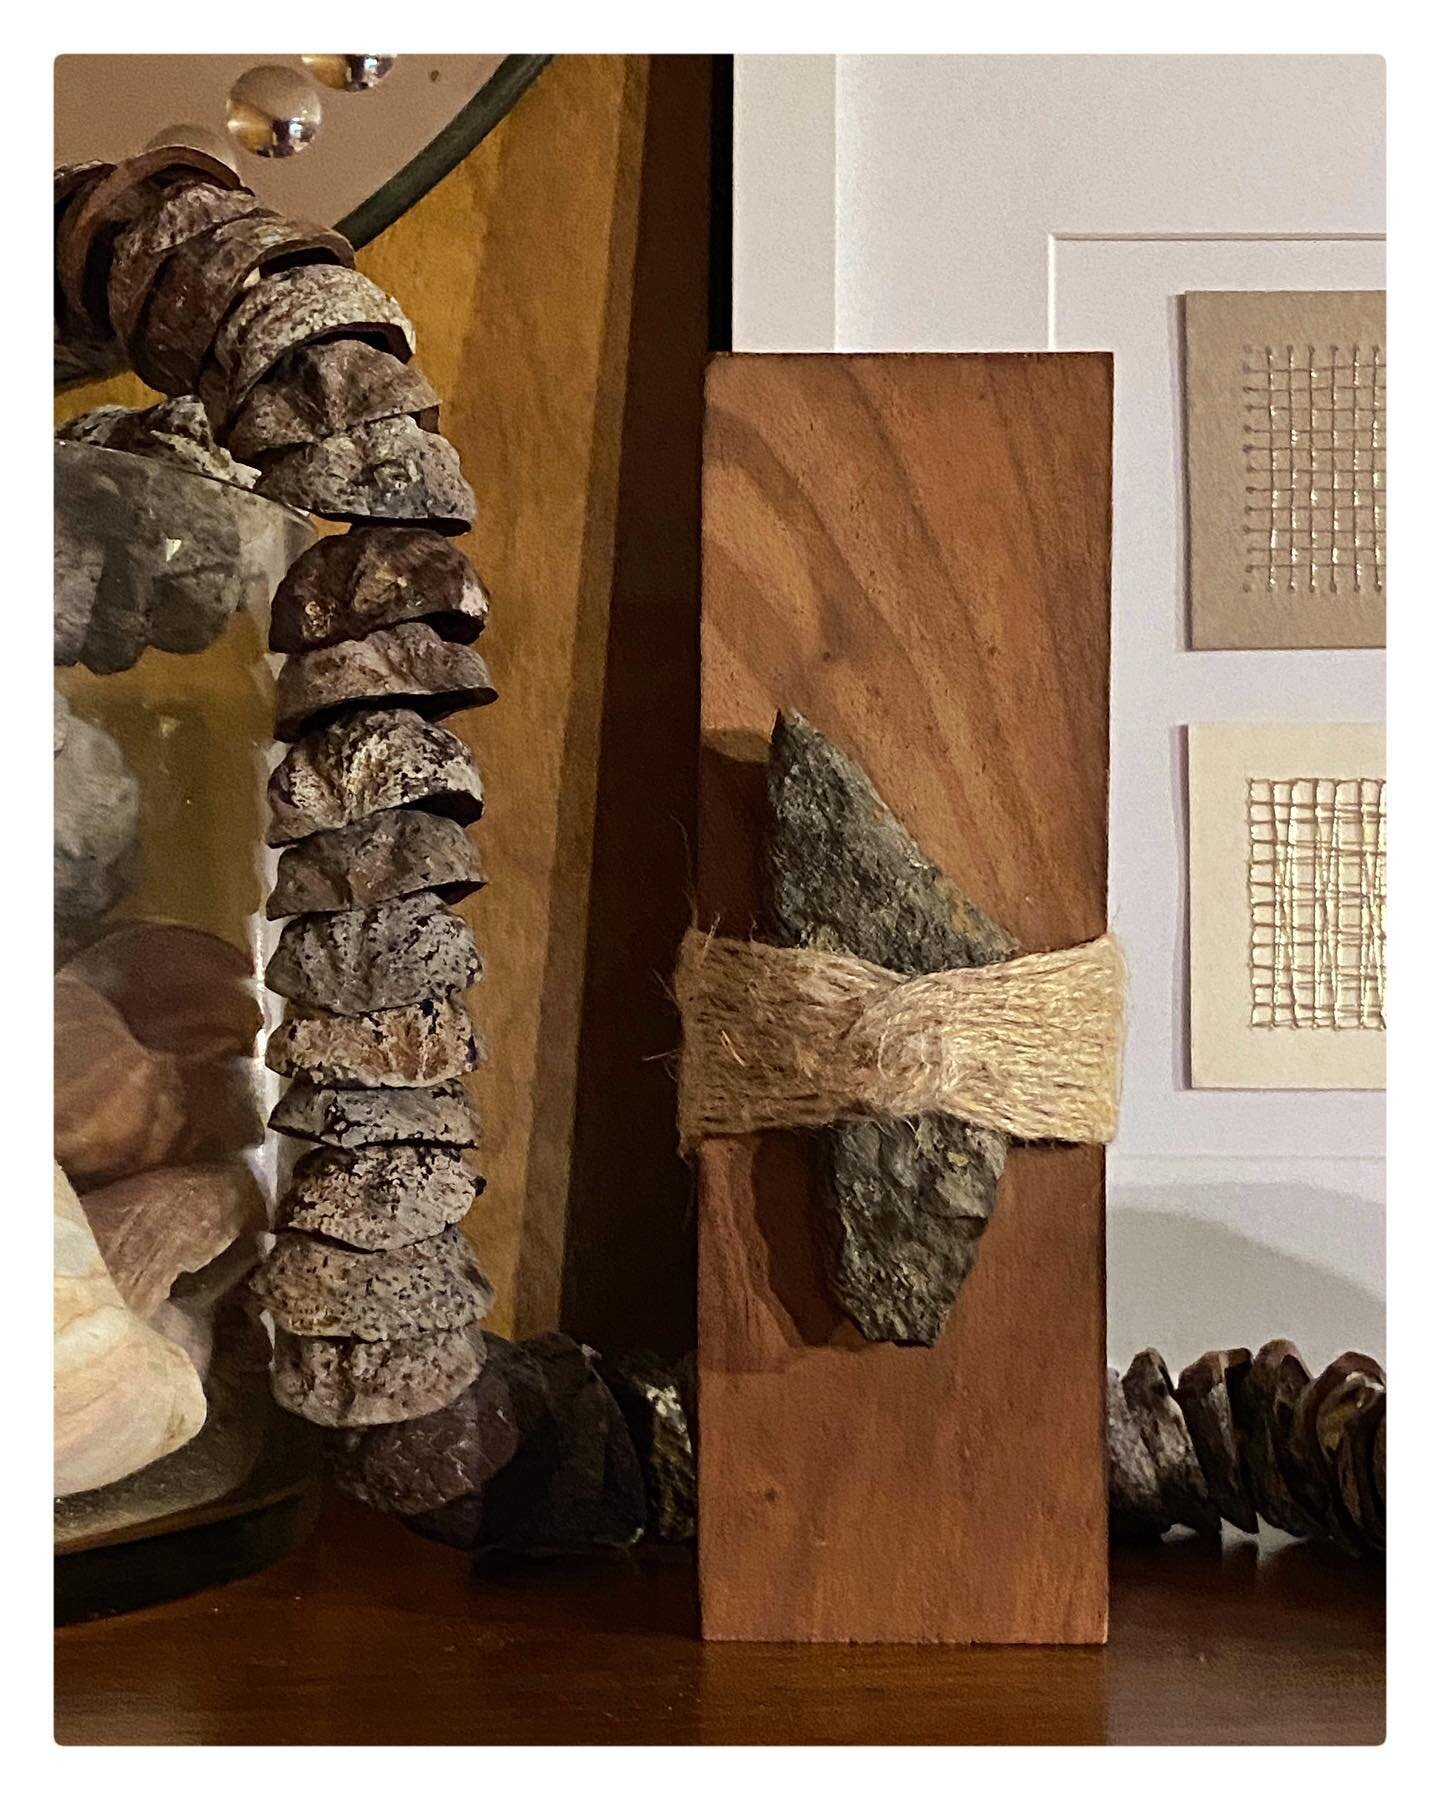 25/28&hellip; of my make one project a day in February. 

Linen wrapped rock on wood. 

Can either be displayed as an object or hung on wall. I wove the tails into the wrap and created a loop on back for hanging. 

The base for this starts with a cow